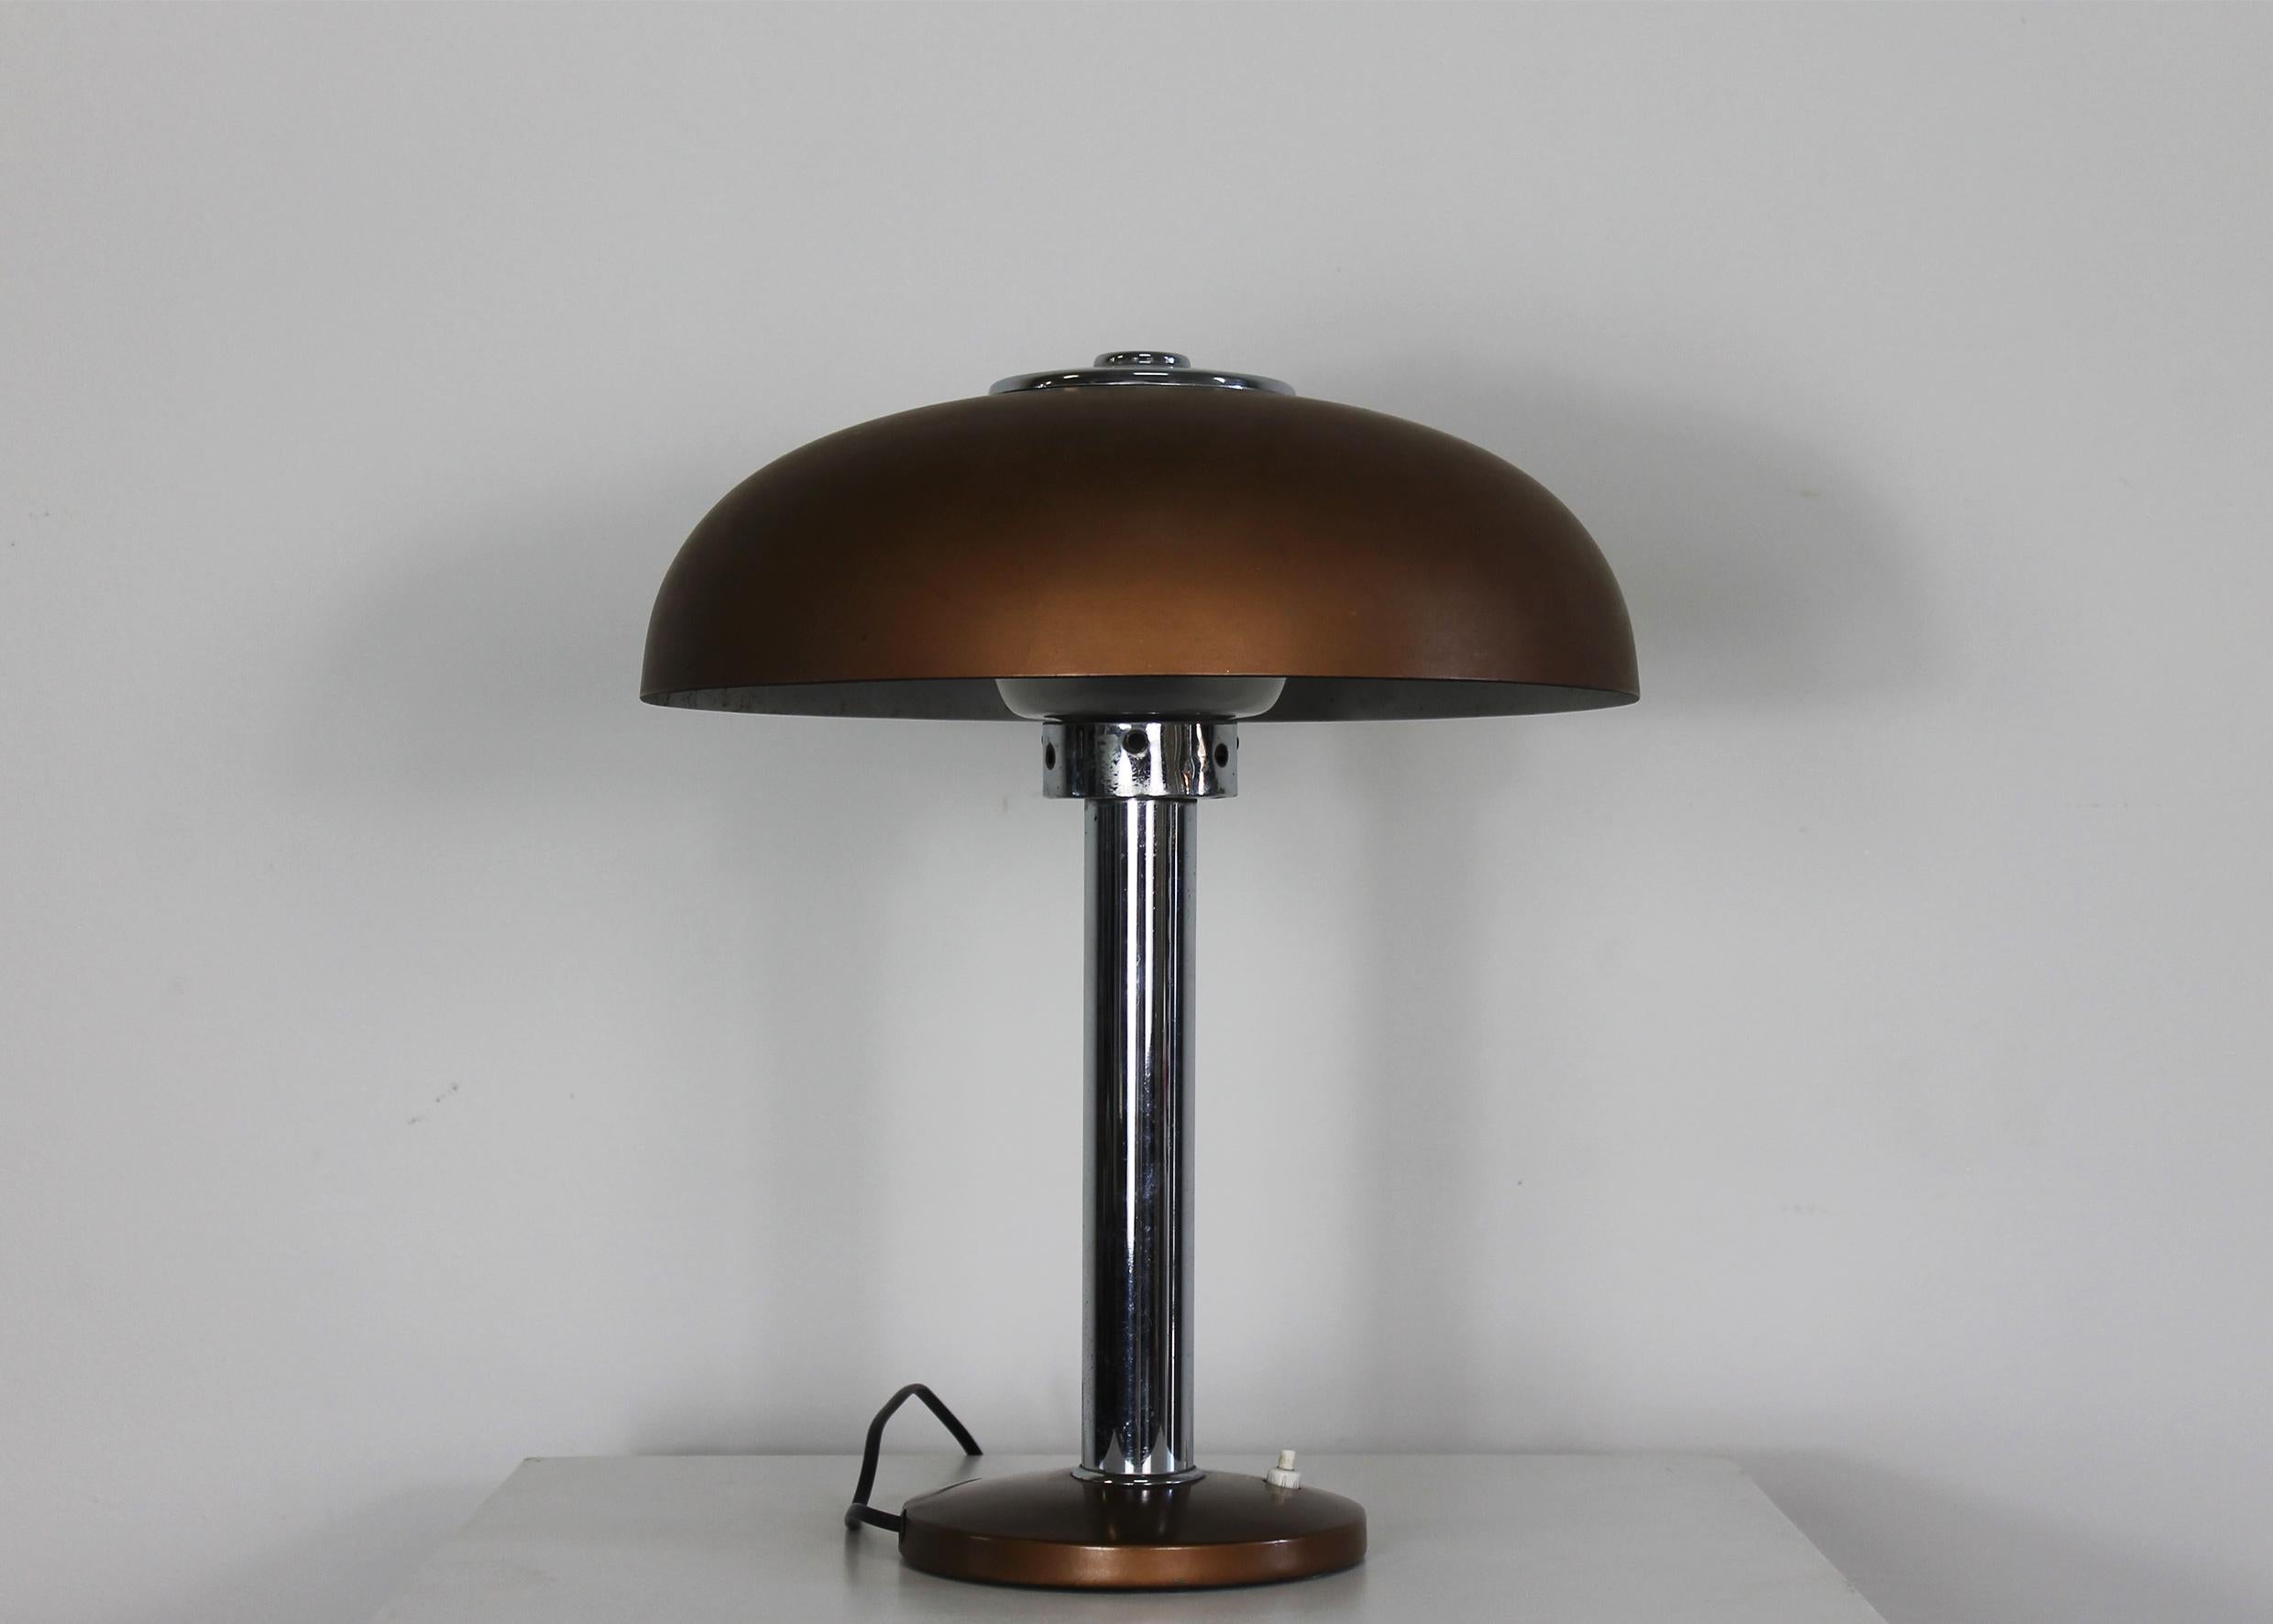 Mid-Century Modern Gio Ponti 546 Table Lamp in Aluminum and Opaline Glass by Ugo Pollice 1940s For Sale